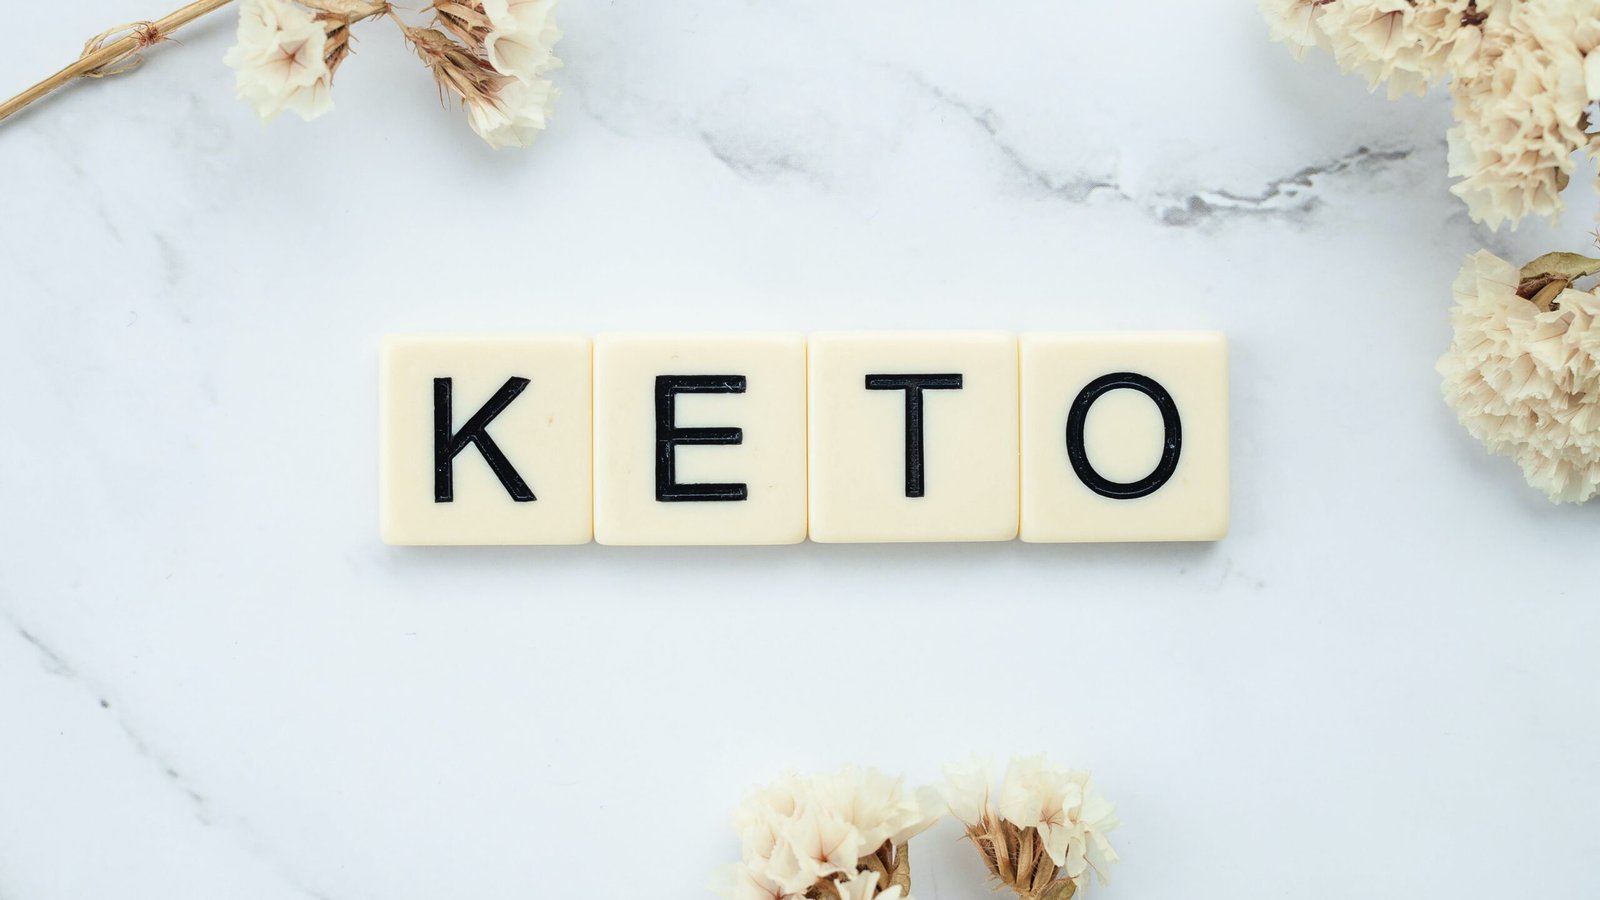 Is the keto diet good for you